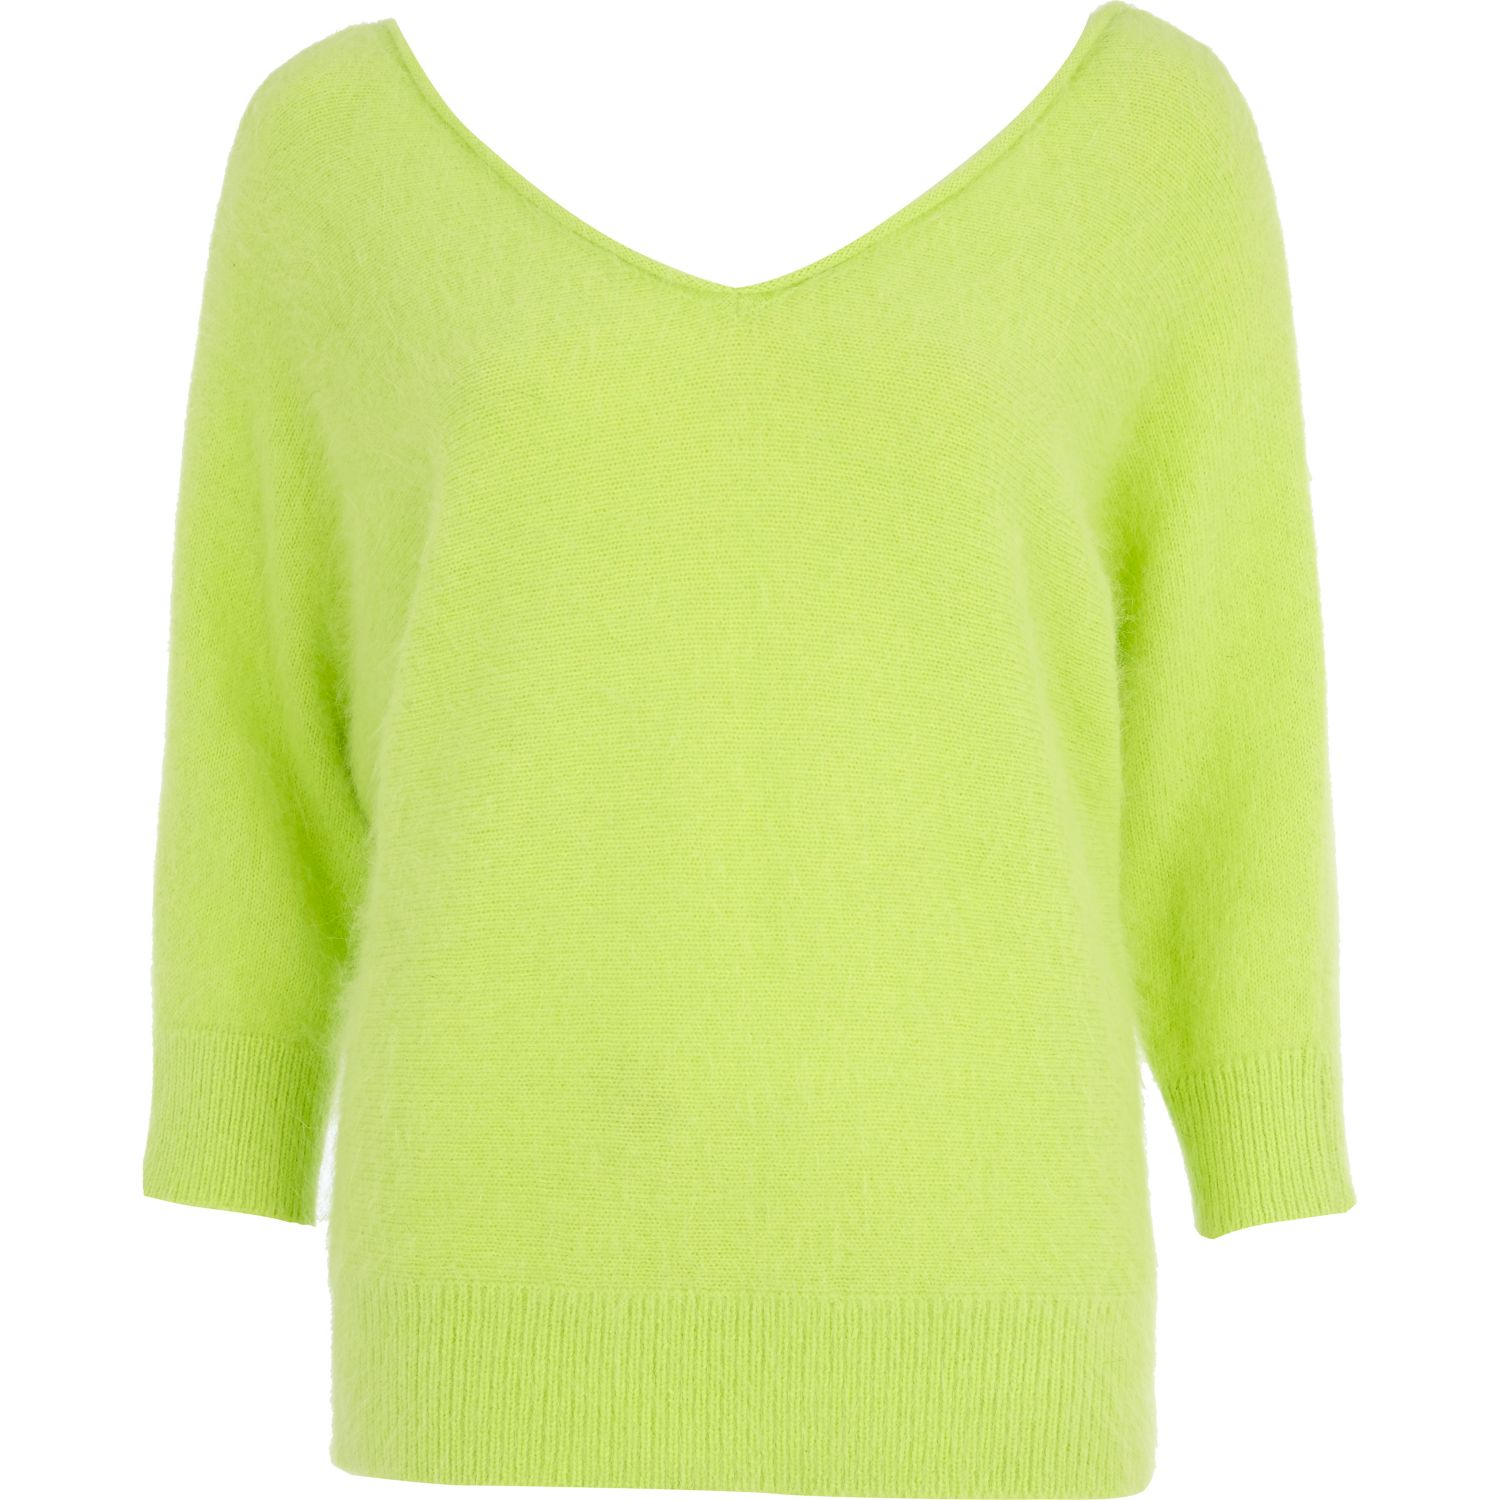 River Island Green Lime Angora V Neck Sweater Product 1 18044166 2 479450890 Normal 